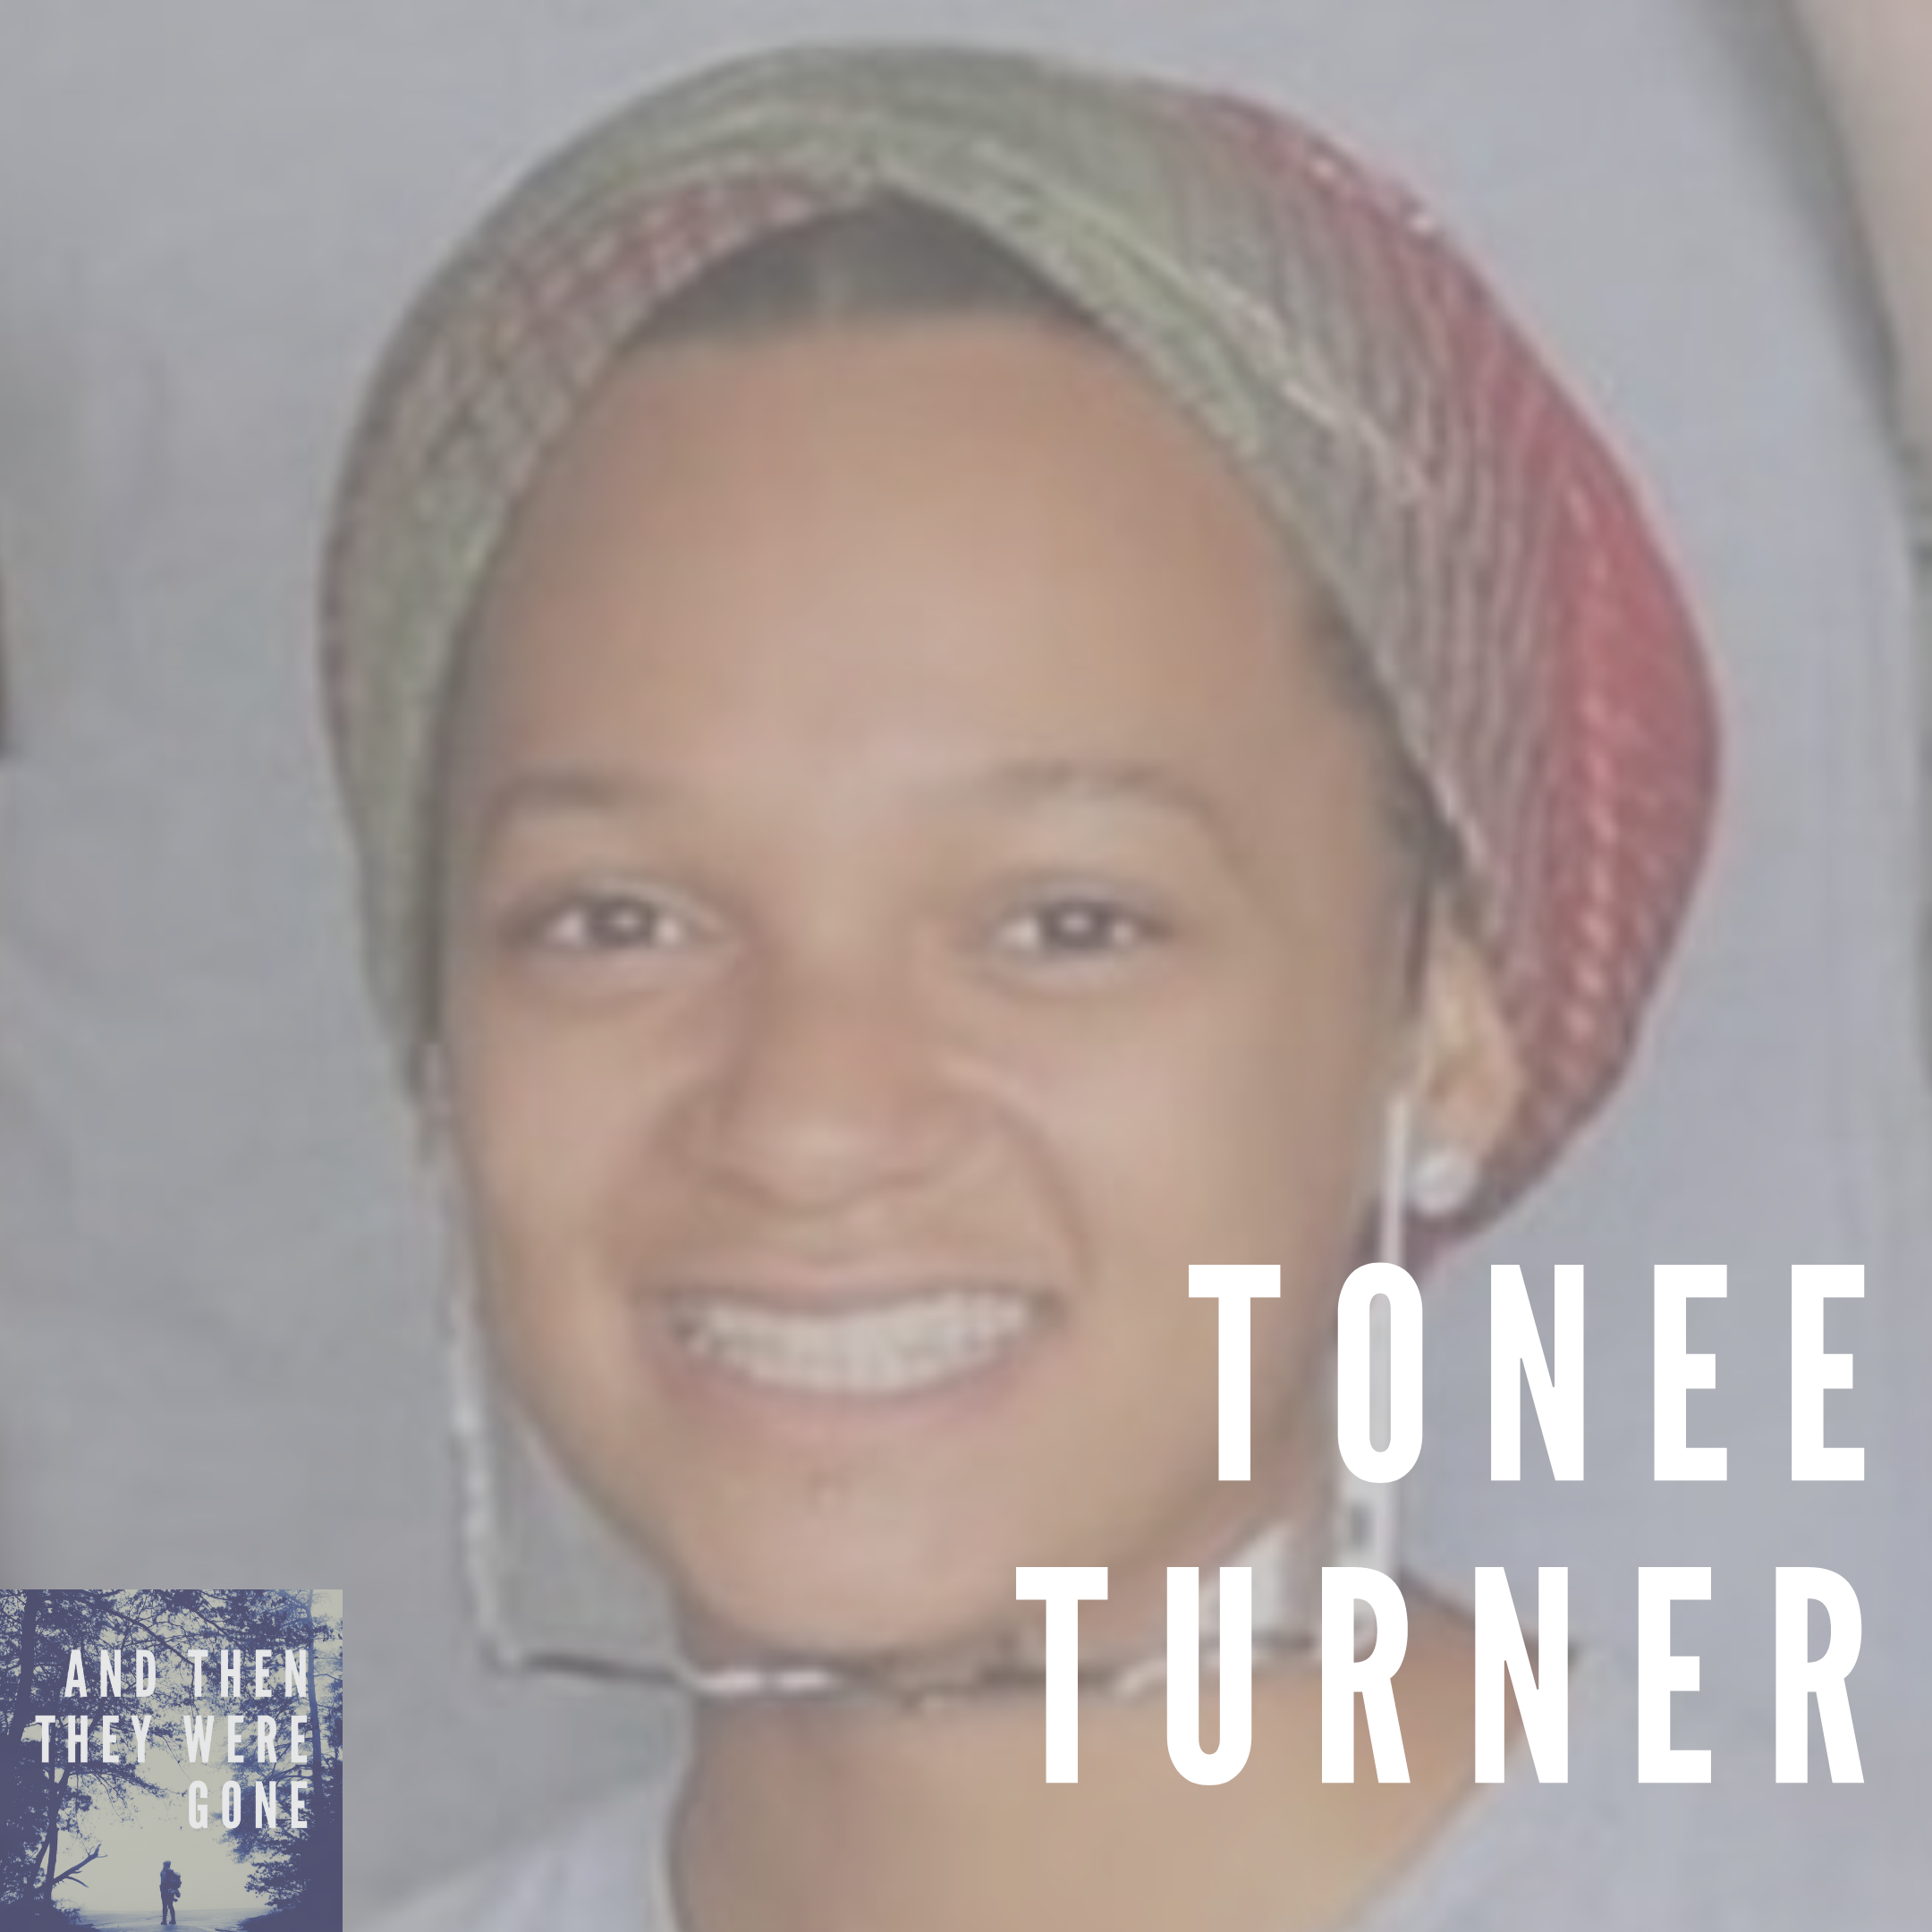 Tonee Tuner has been missing from Pittsburgh, PA since December 30, 2019